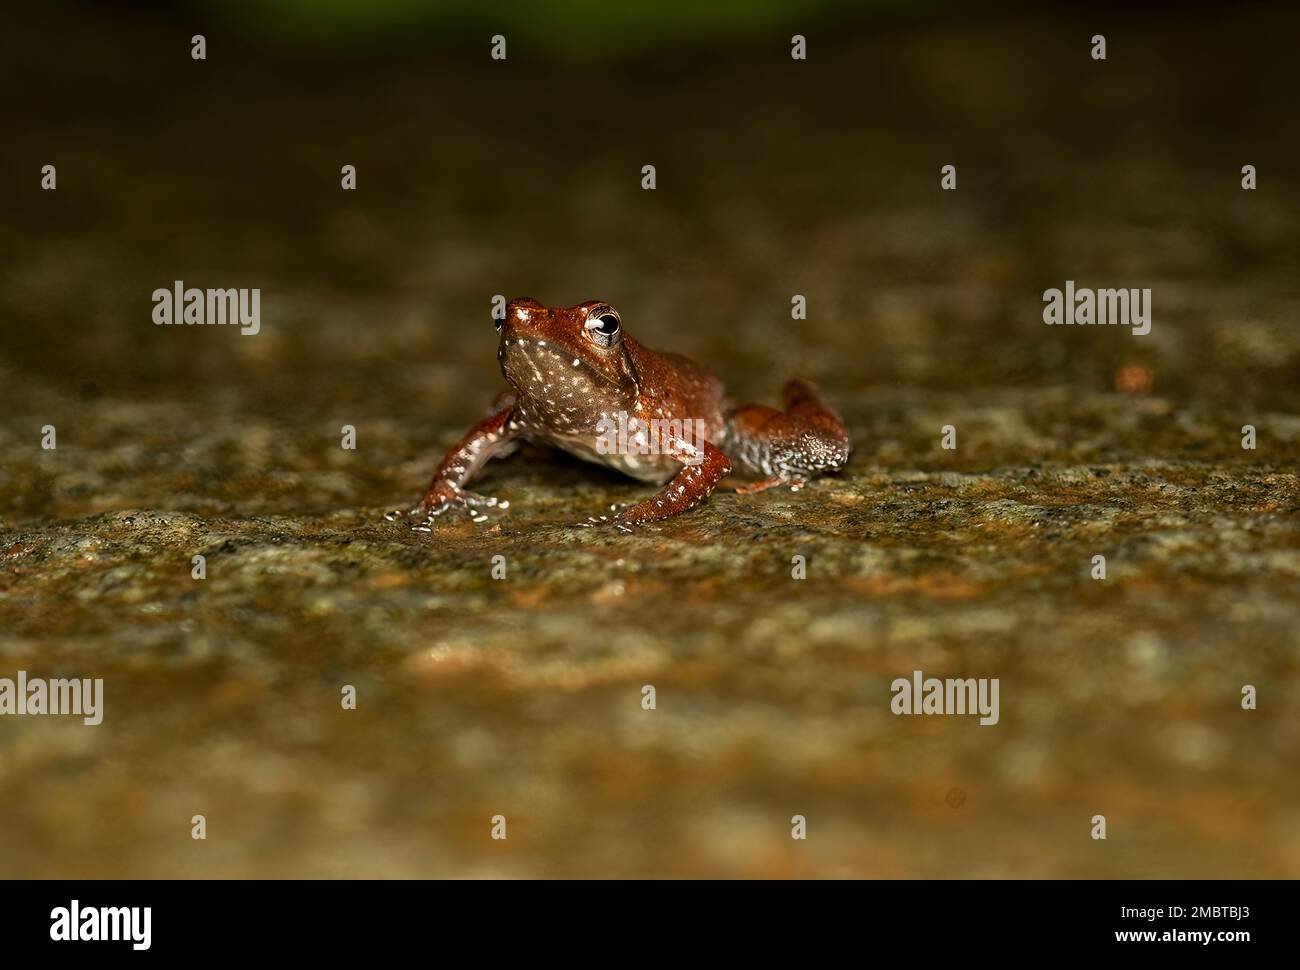 A dancing frog resting on a rocky surface inside Agumbe rain forest on a rainy day Stock Photo